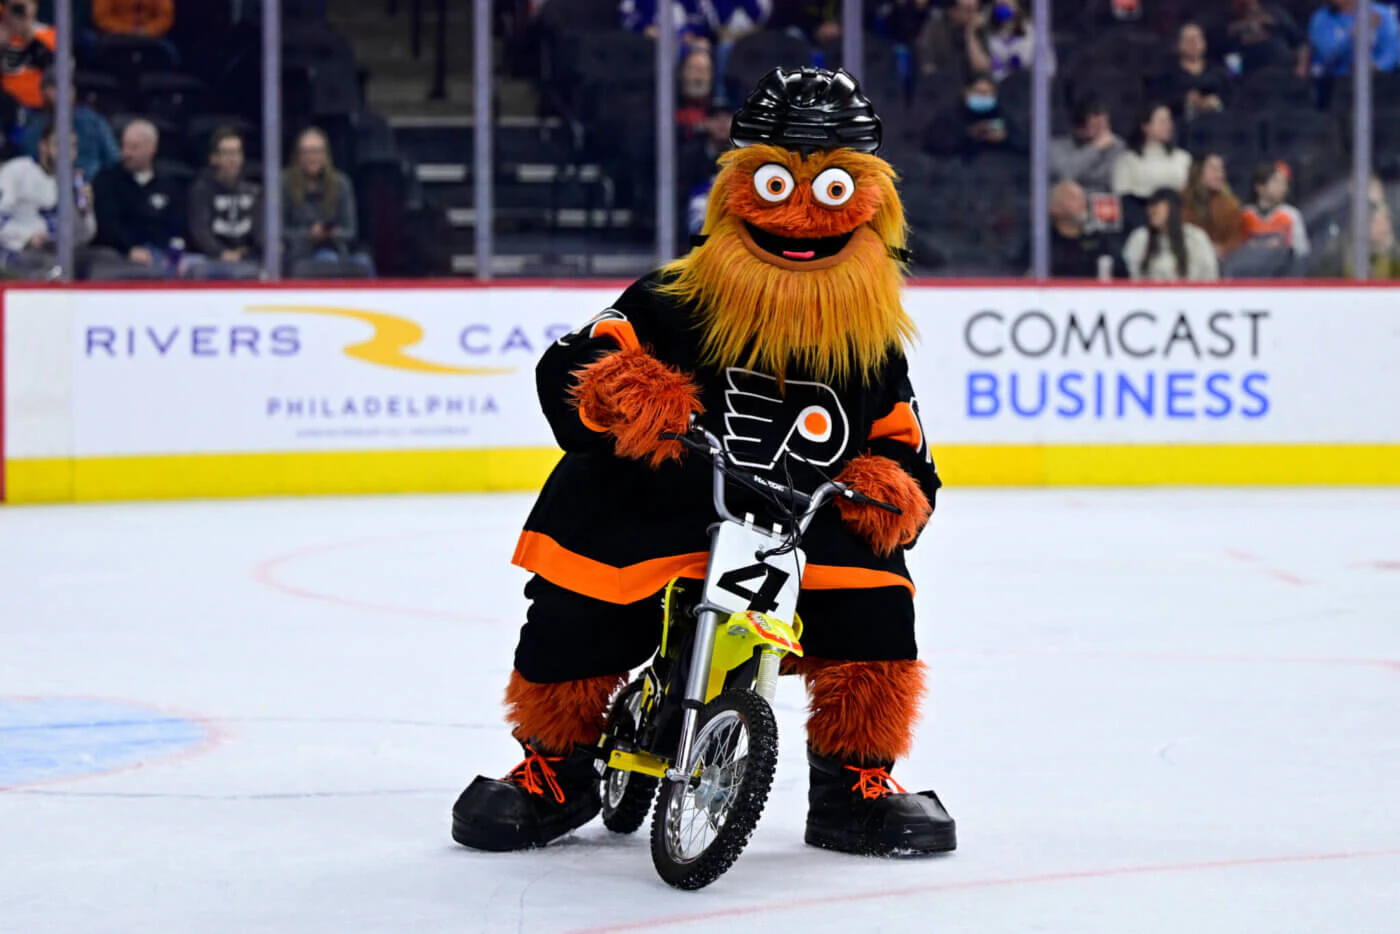 Gritty visits CBS Philadelphia to show off Flyers' new jerseys 